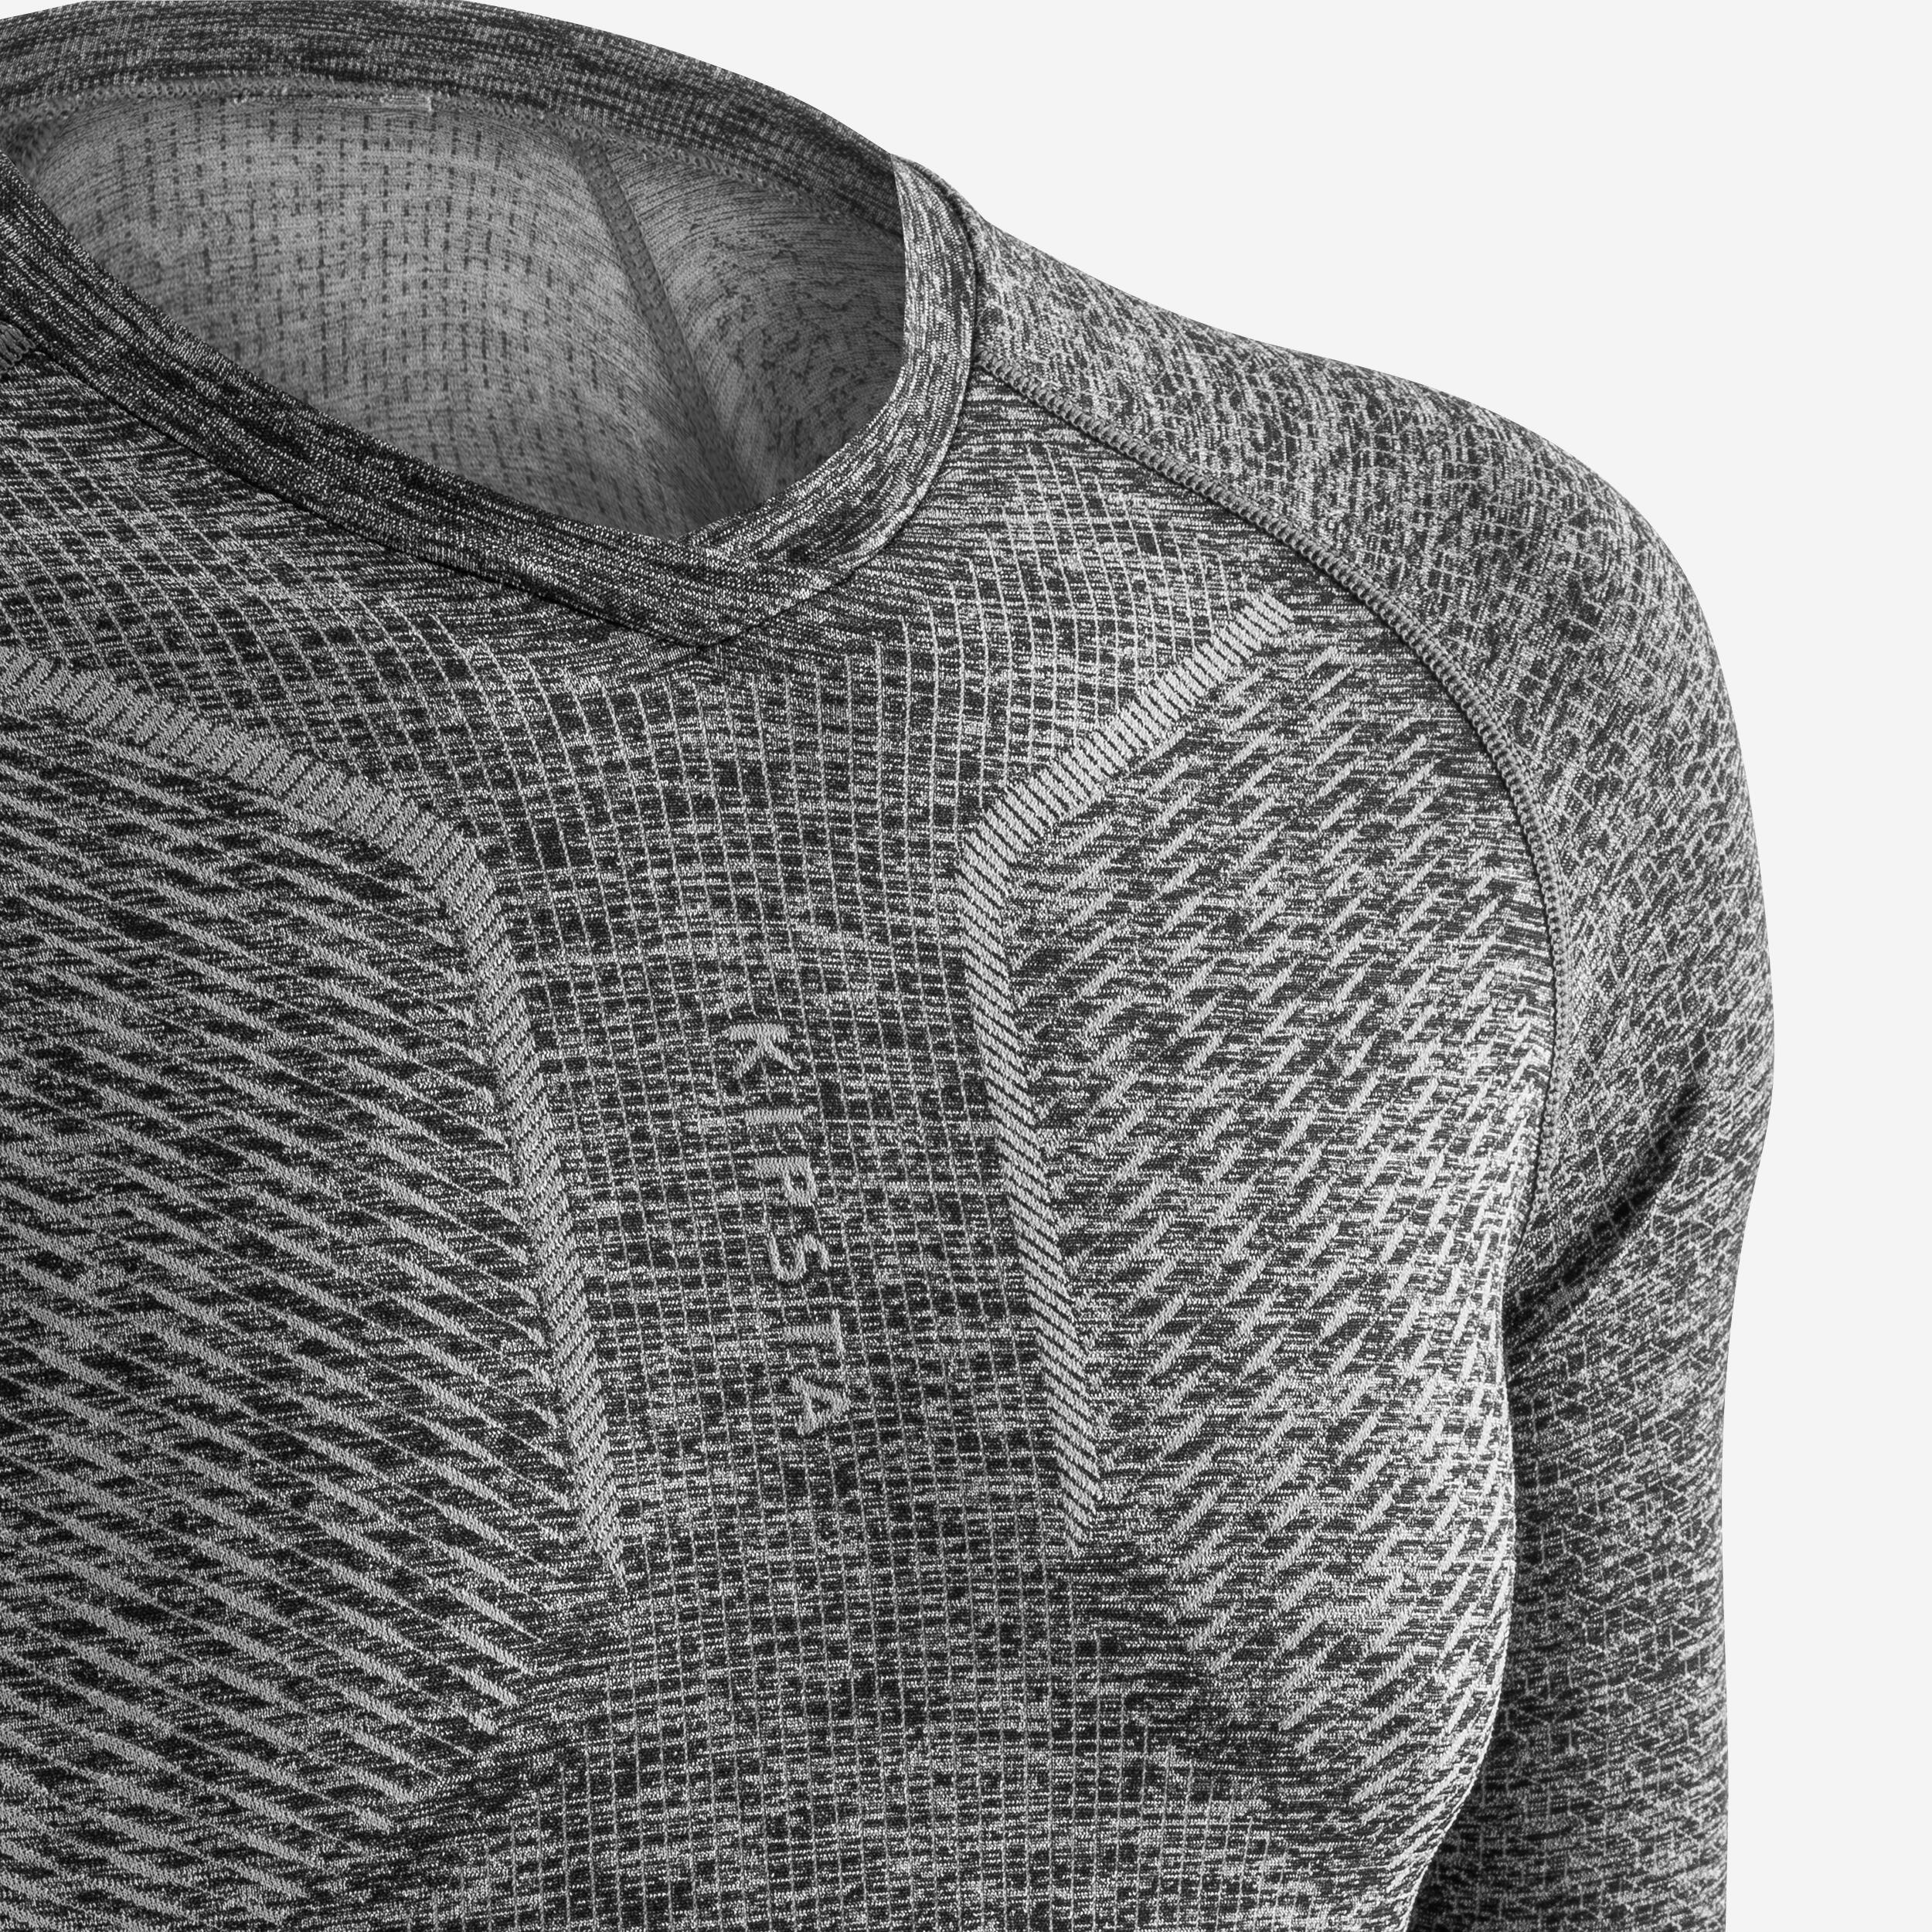 Adult Long-Sleeved Thermal Base Layer Top Keepdry 500 - Mottled Grey 7/10